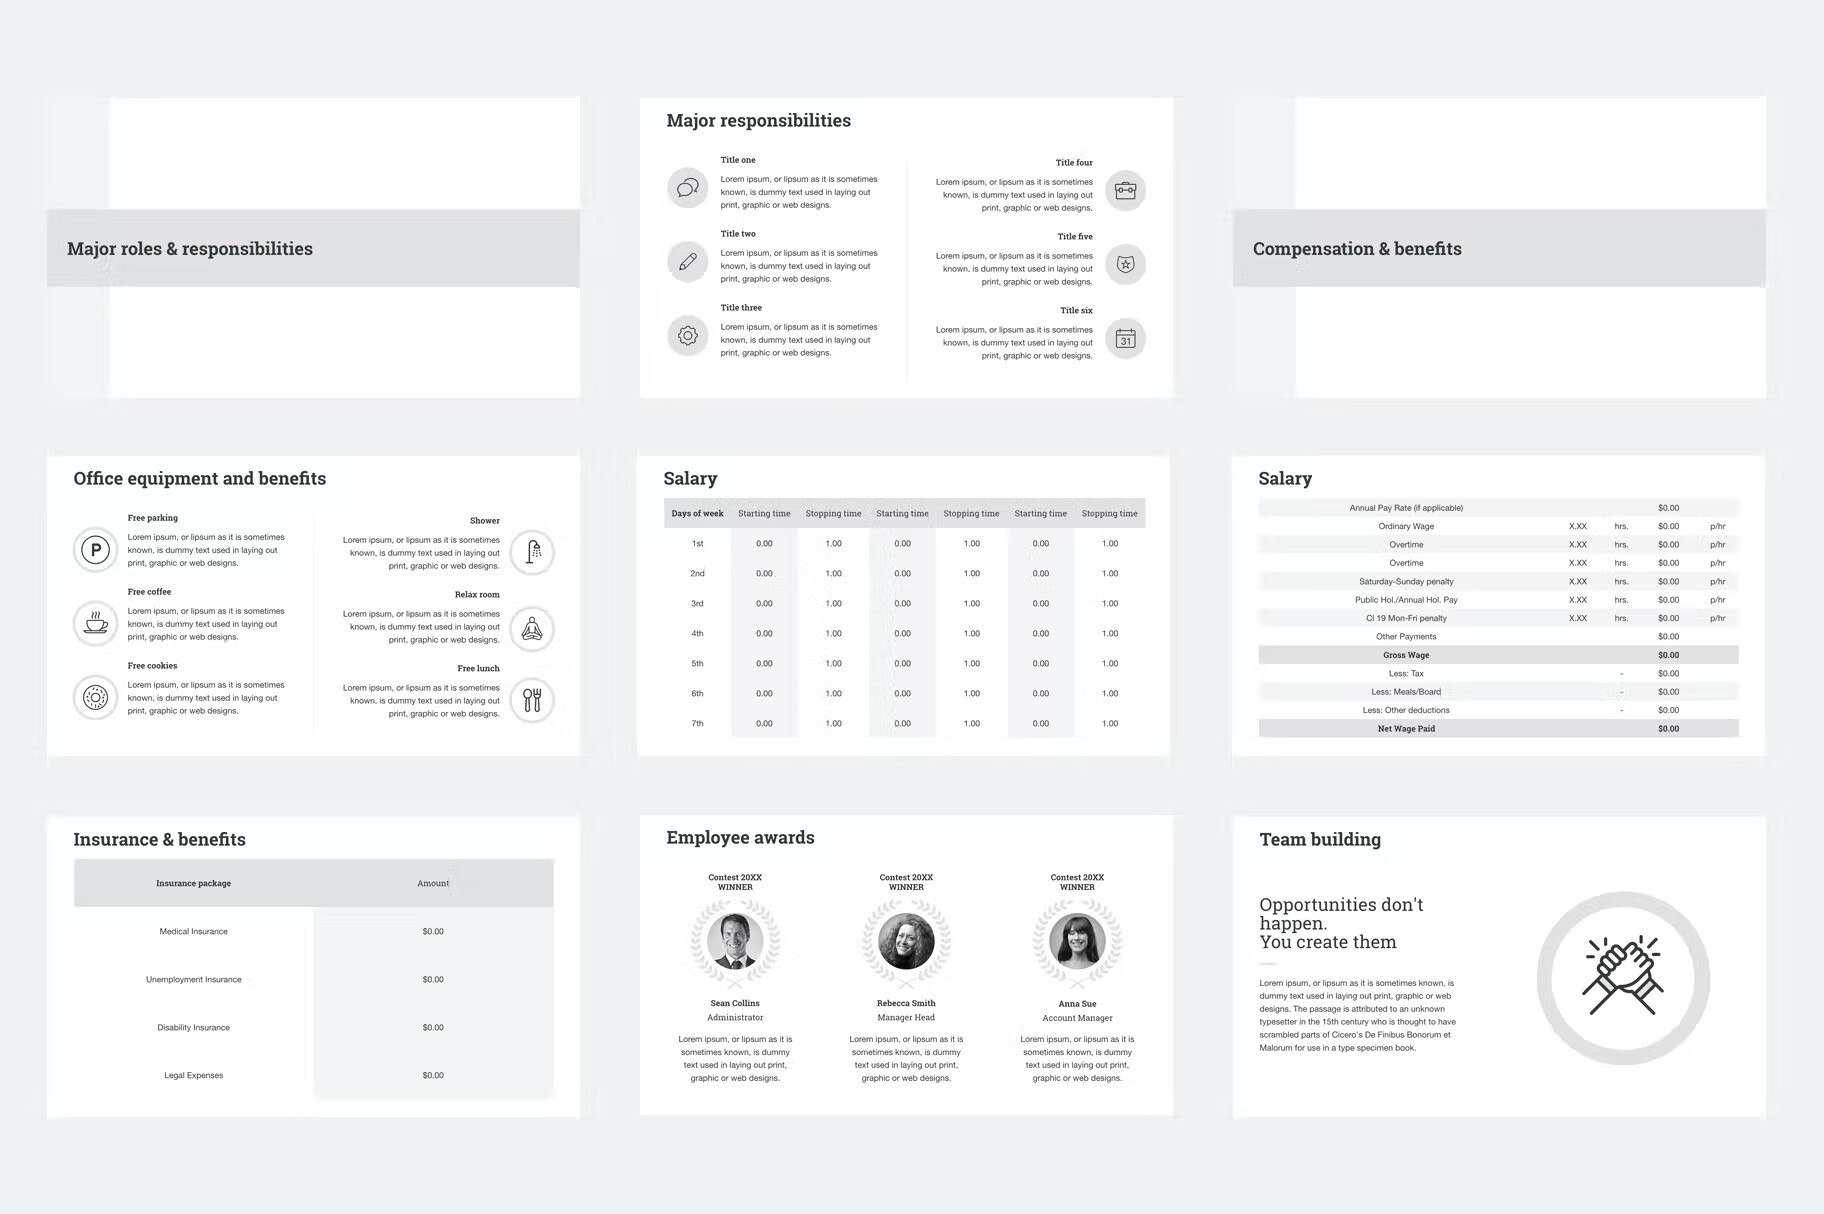 Light grey tables, maps and infographics for ypur presentation.